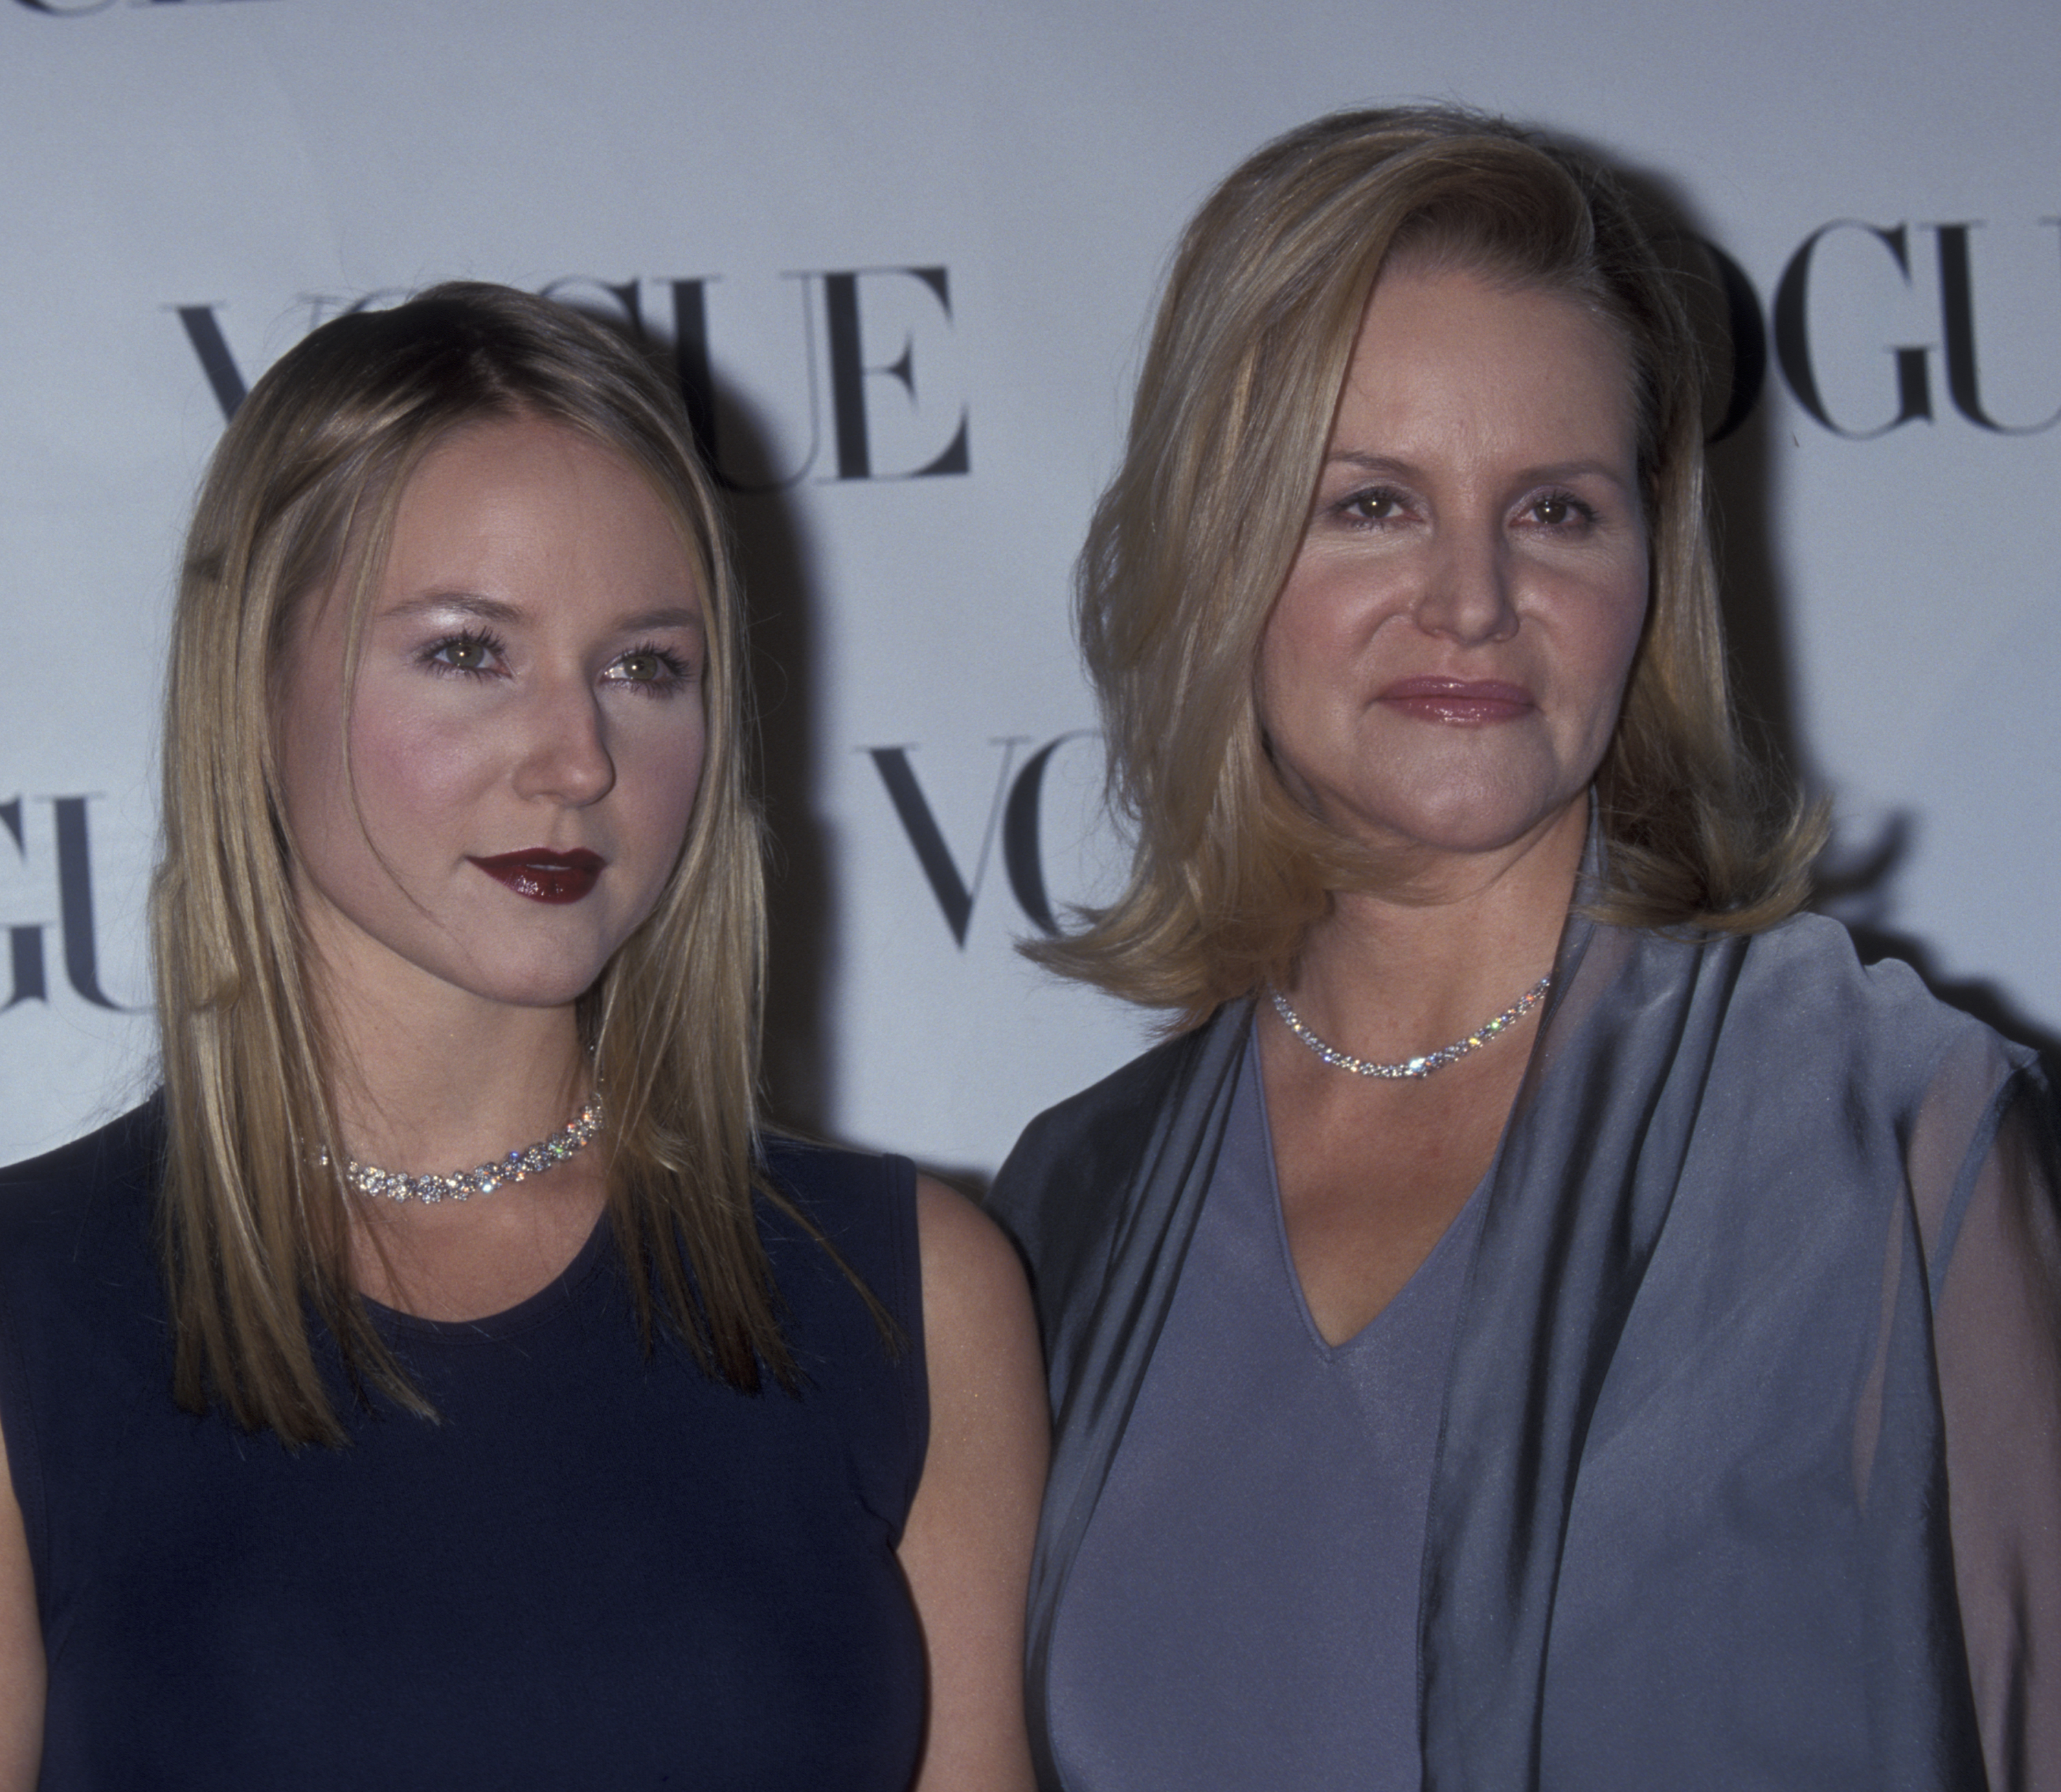 Jewel and Lenedra Caroll attend Vogue Magazine Party at the Puck Building in New York City, on January 20, 1999. | Source: Getty Images